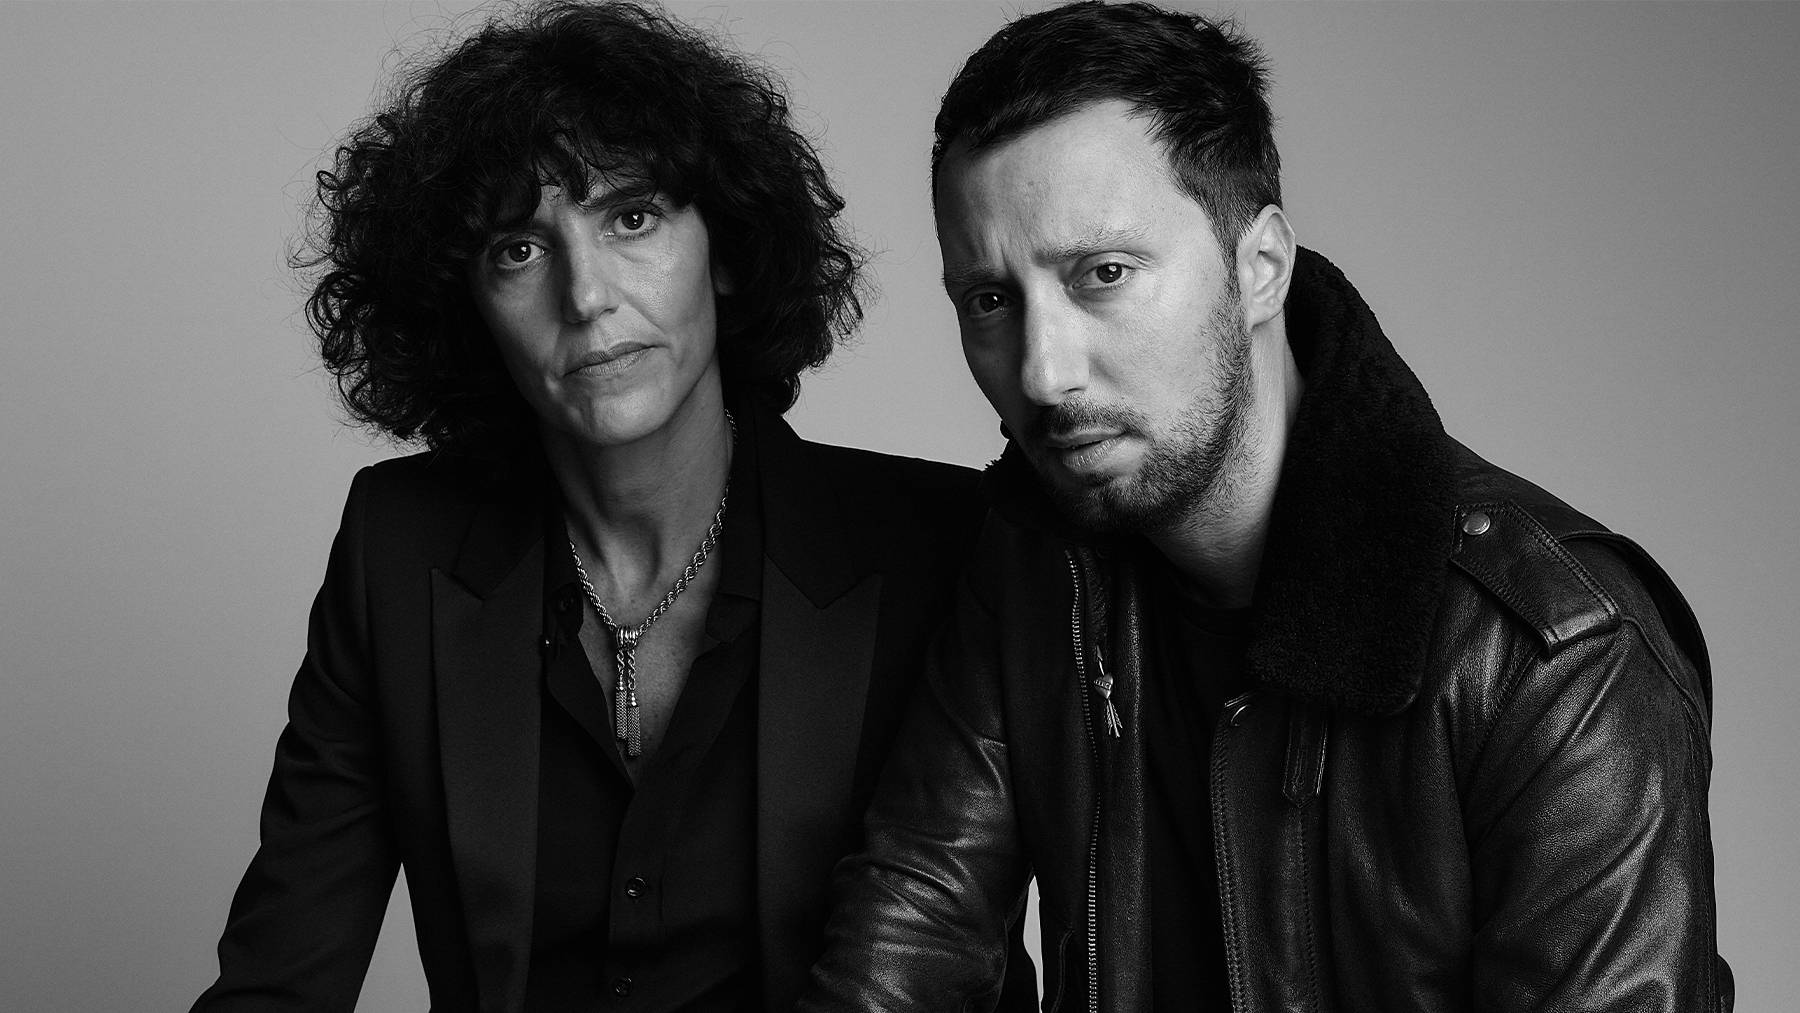 CEO Francesca Bellettini breaks down how she worked with designer Anthony Vaccarello to more than double sales in 5 years.